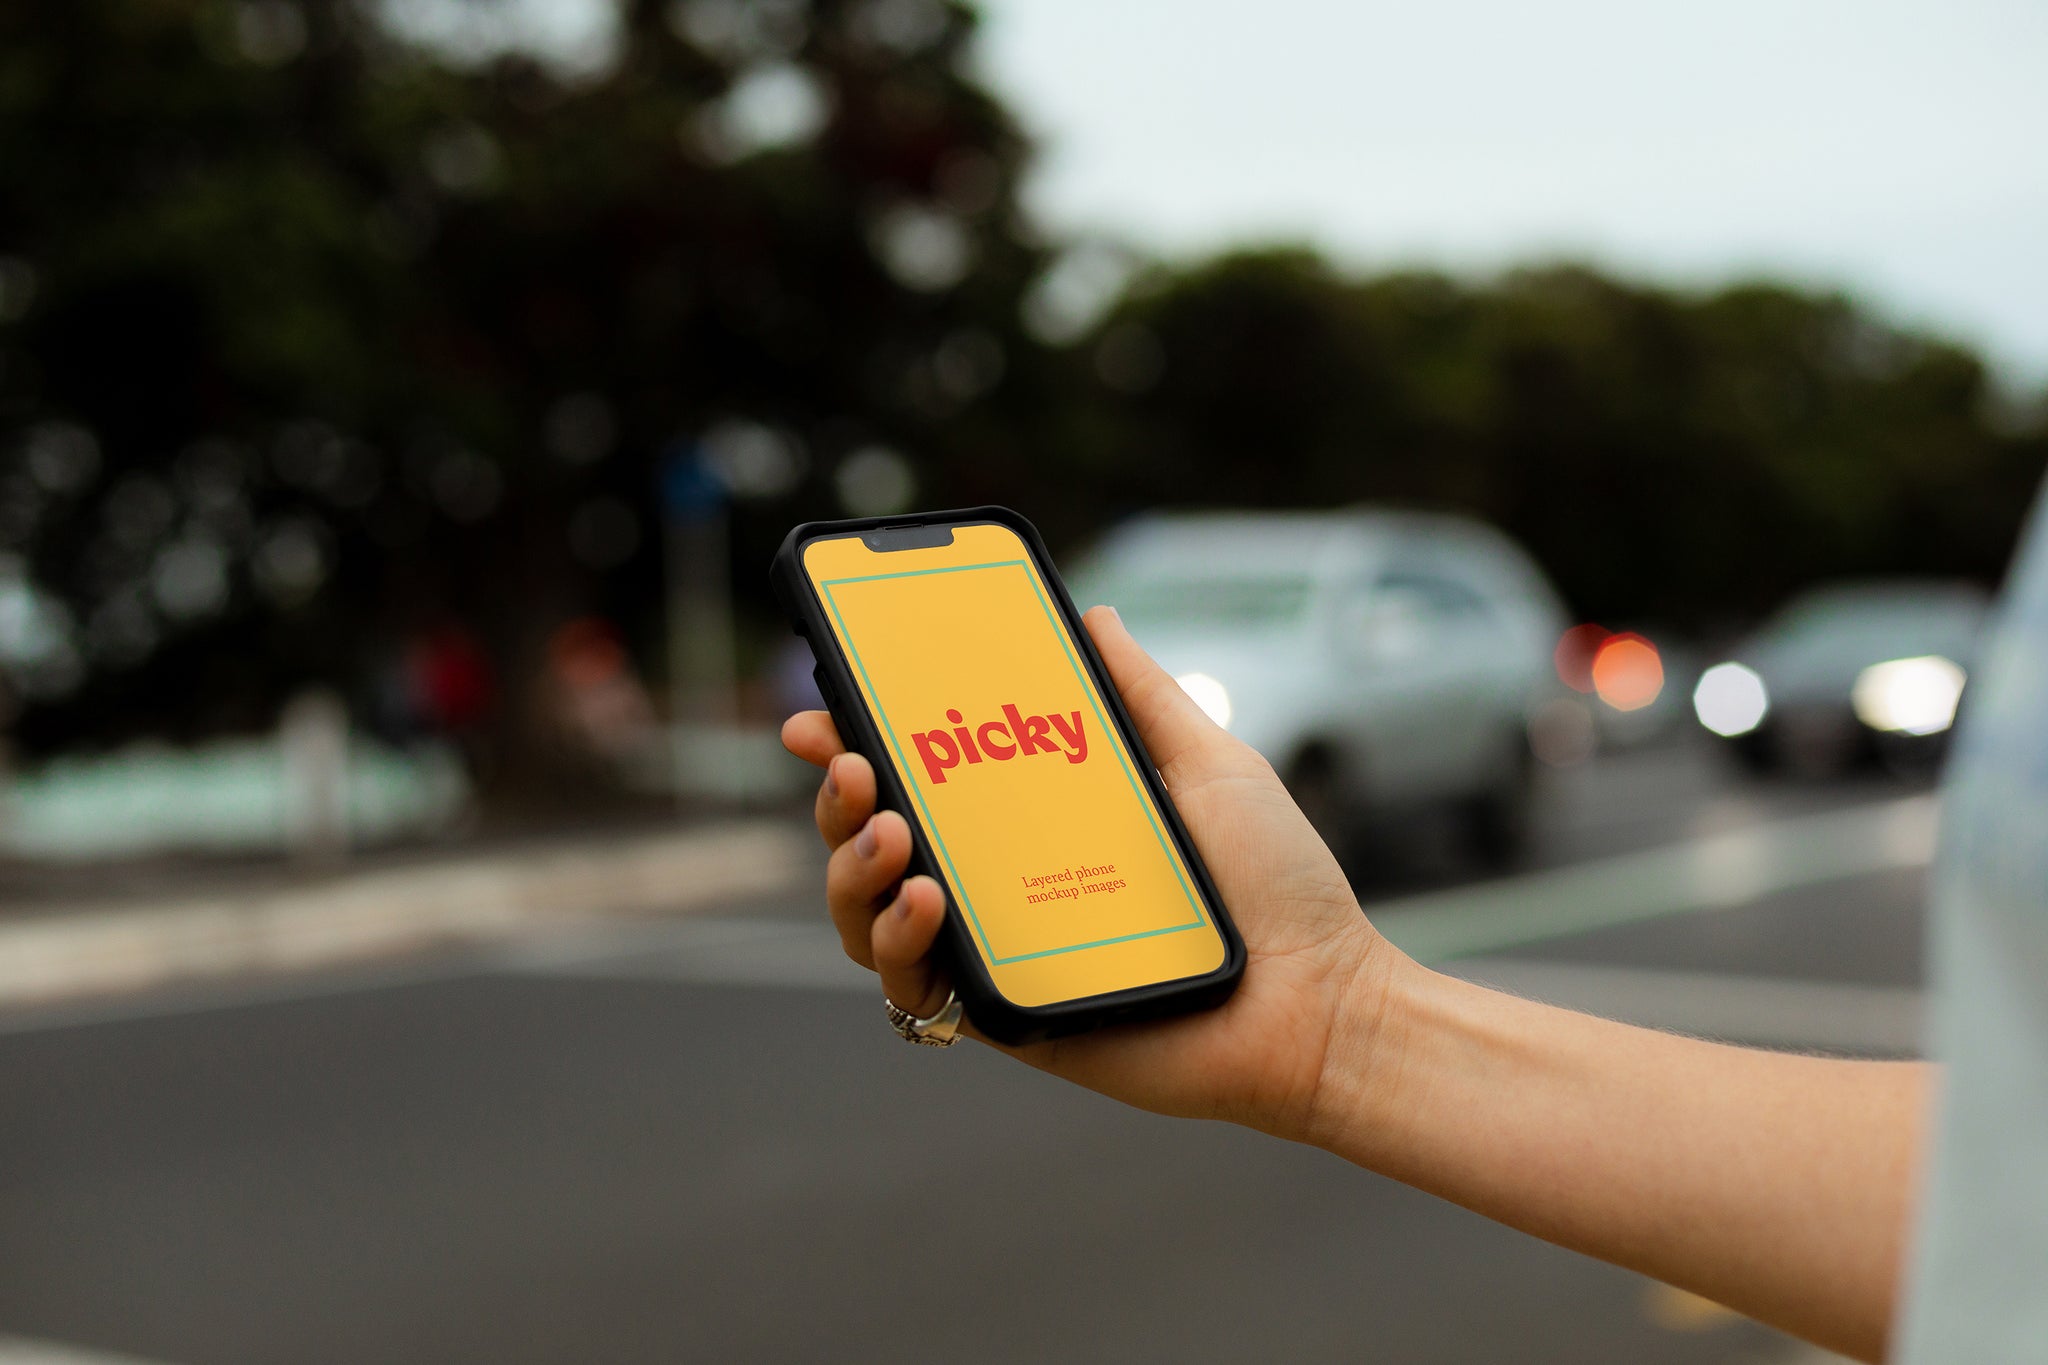 Man holding smart phone, iphone at traffic light crossing. Holding phone out, body cropped. Cars with headlights visible. Bright yellow screen with the words 'picky' written in red. 